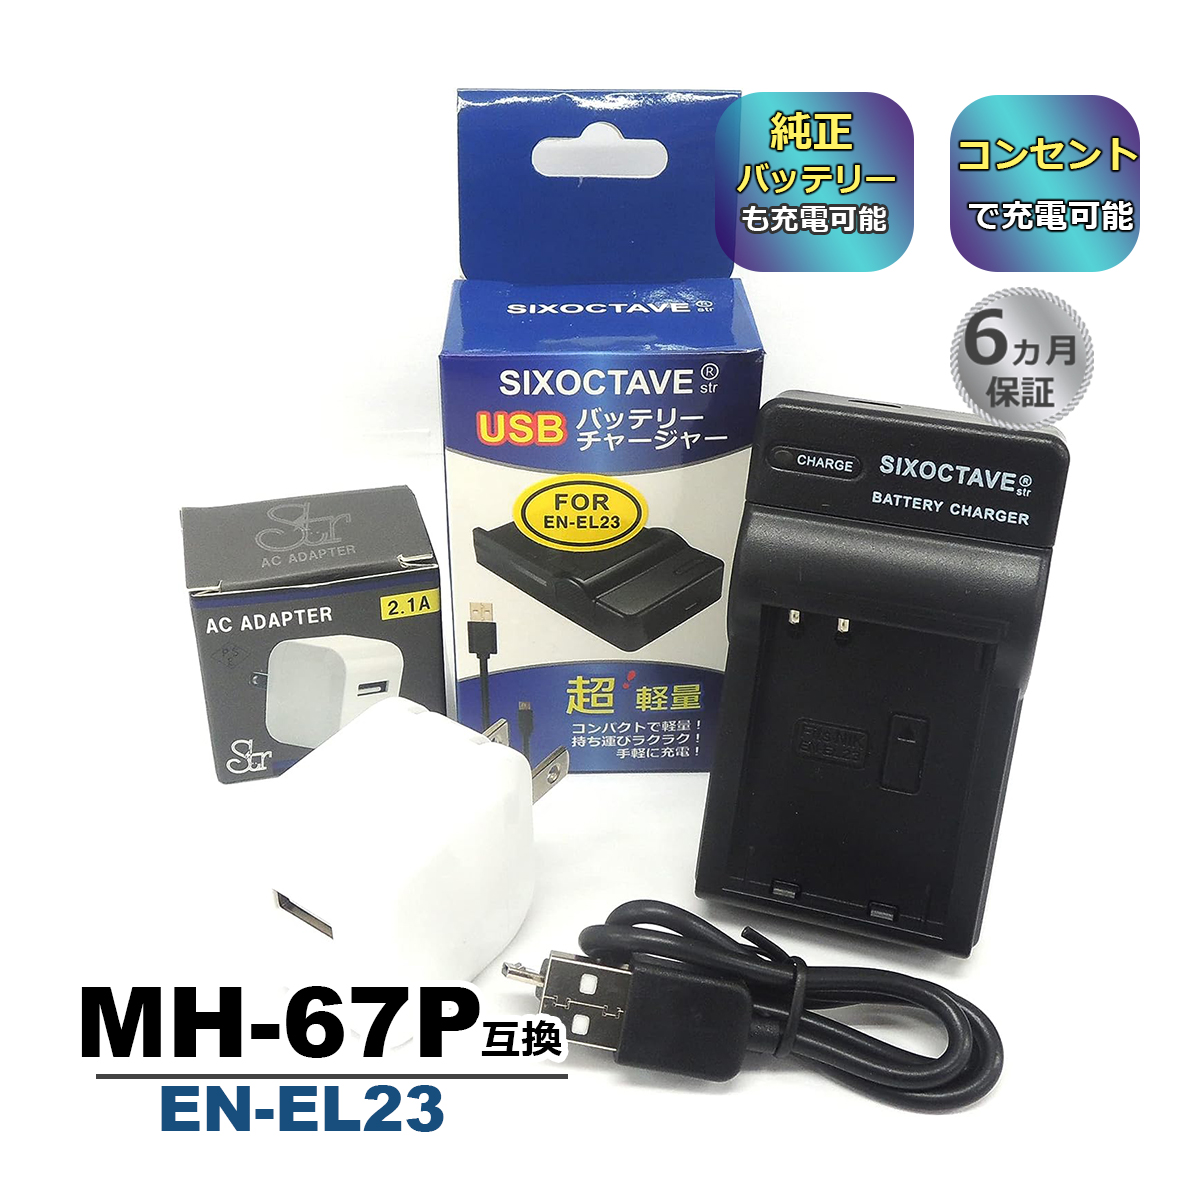 EN-EL23 Nikon Nikon interchangeable USB charger * outlet charge for AC adaptor attaching * 2 point set original battery charge possibility Coolpix charger (a2.1)